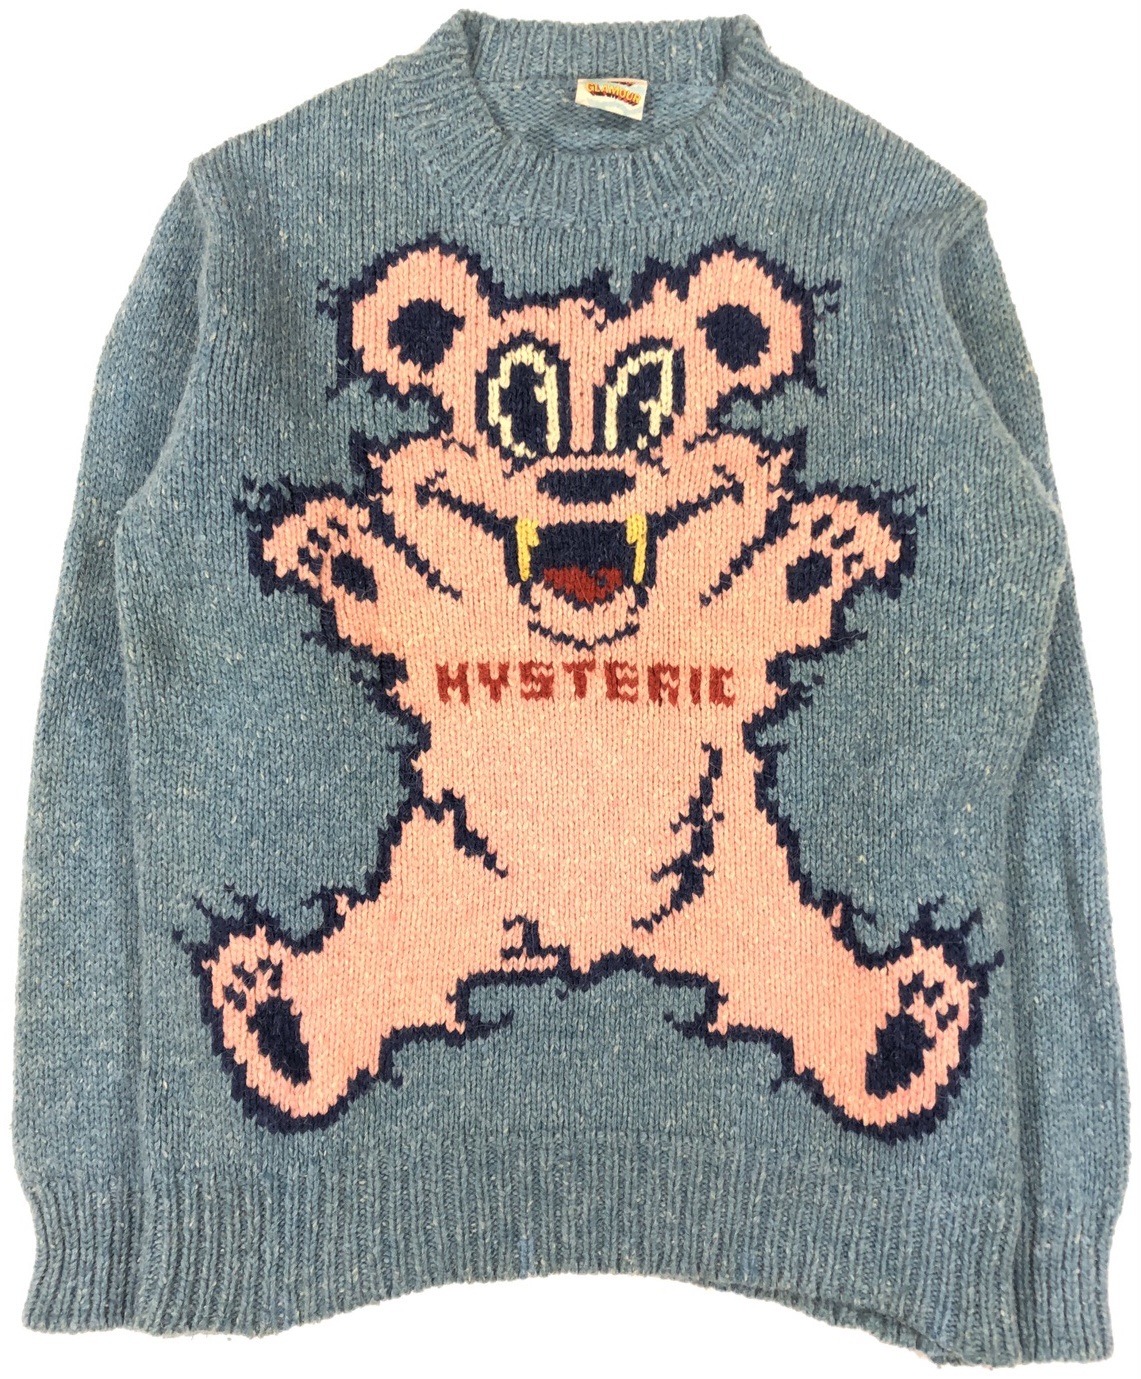 image therapy — Hysteric Glamour: ヒステリックなクマ Knit Sweater